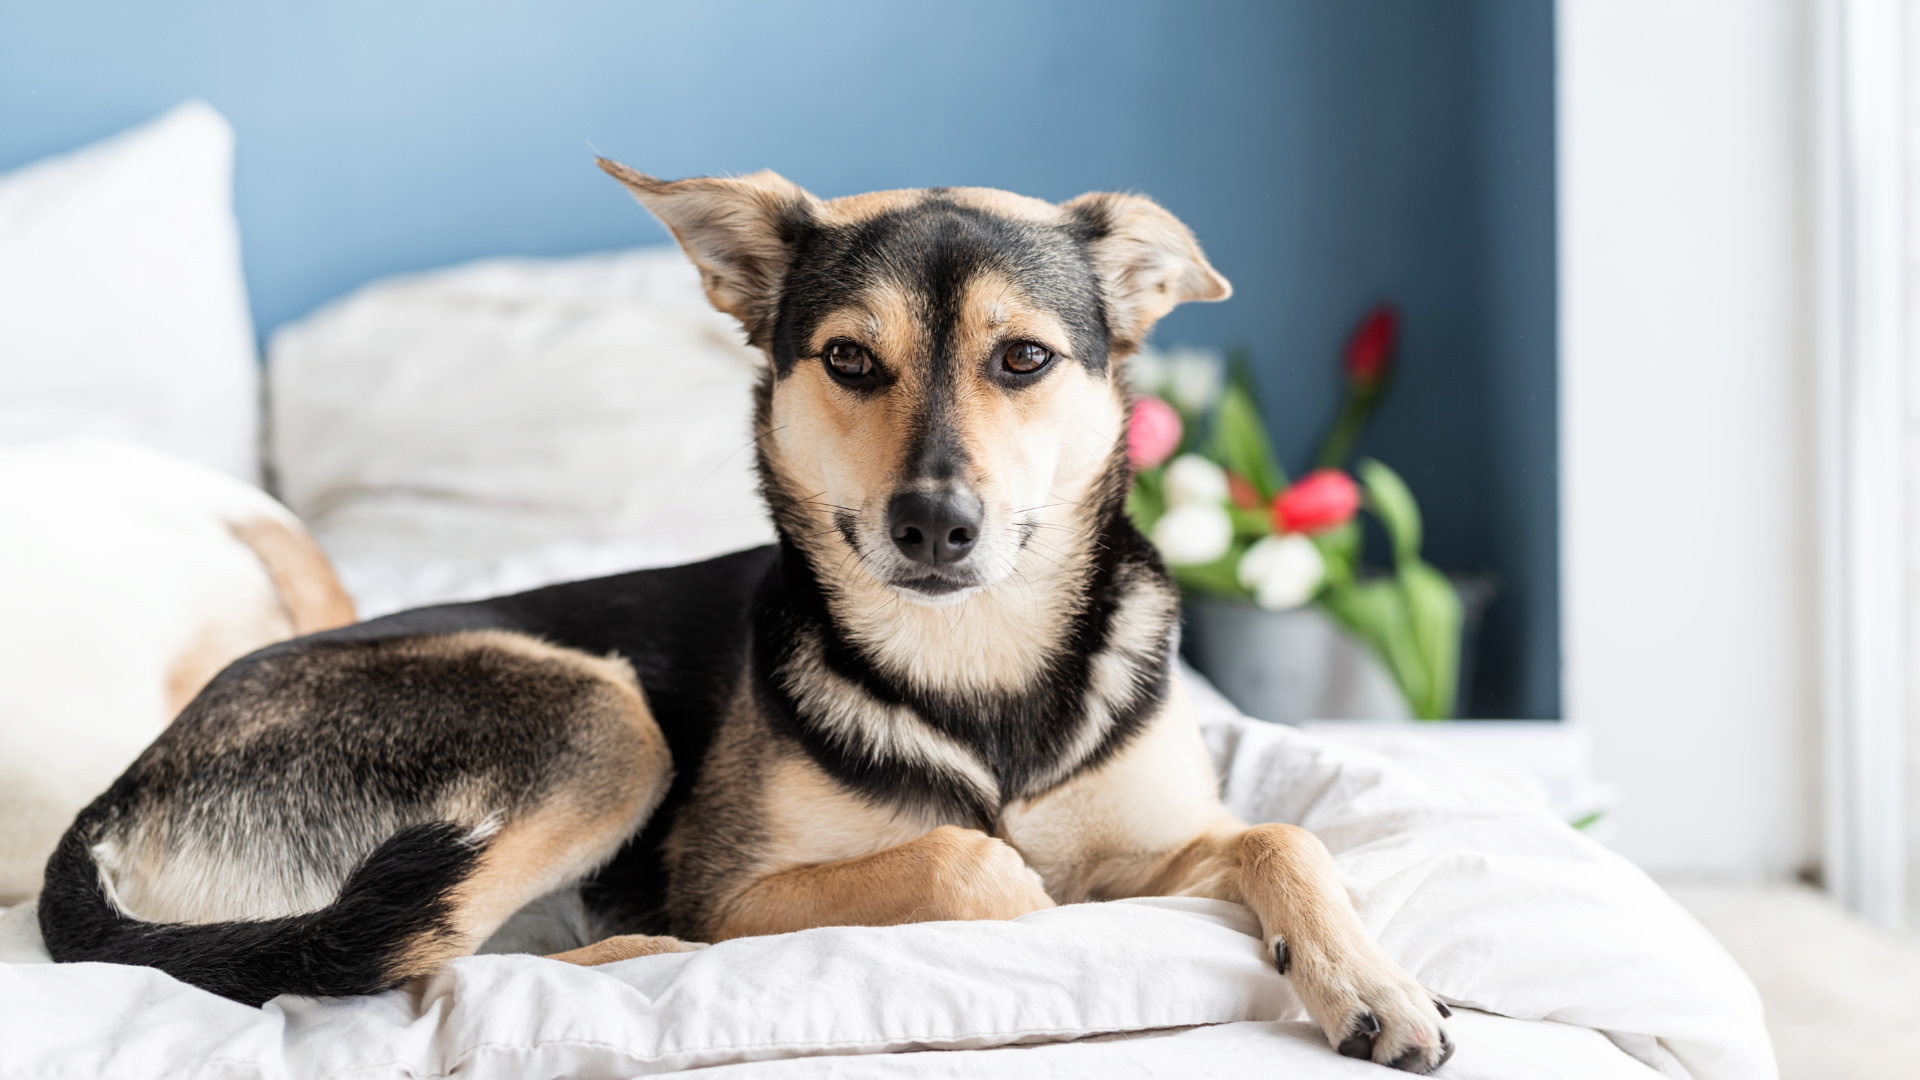 Natural Remedies for Common Dog Issues